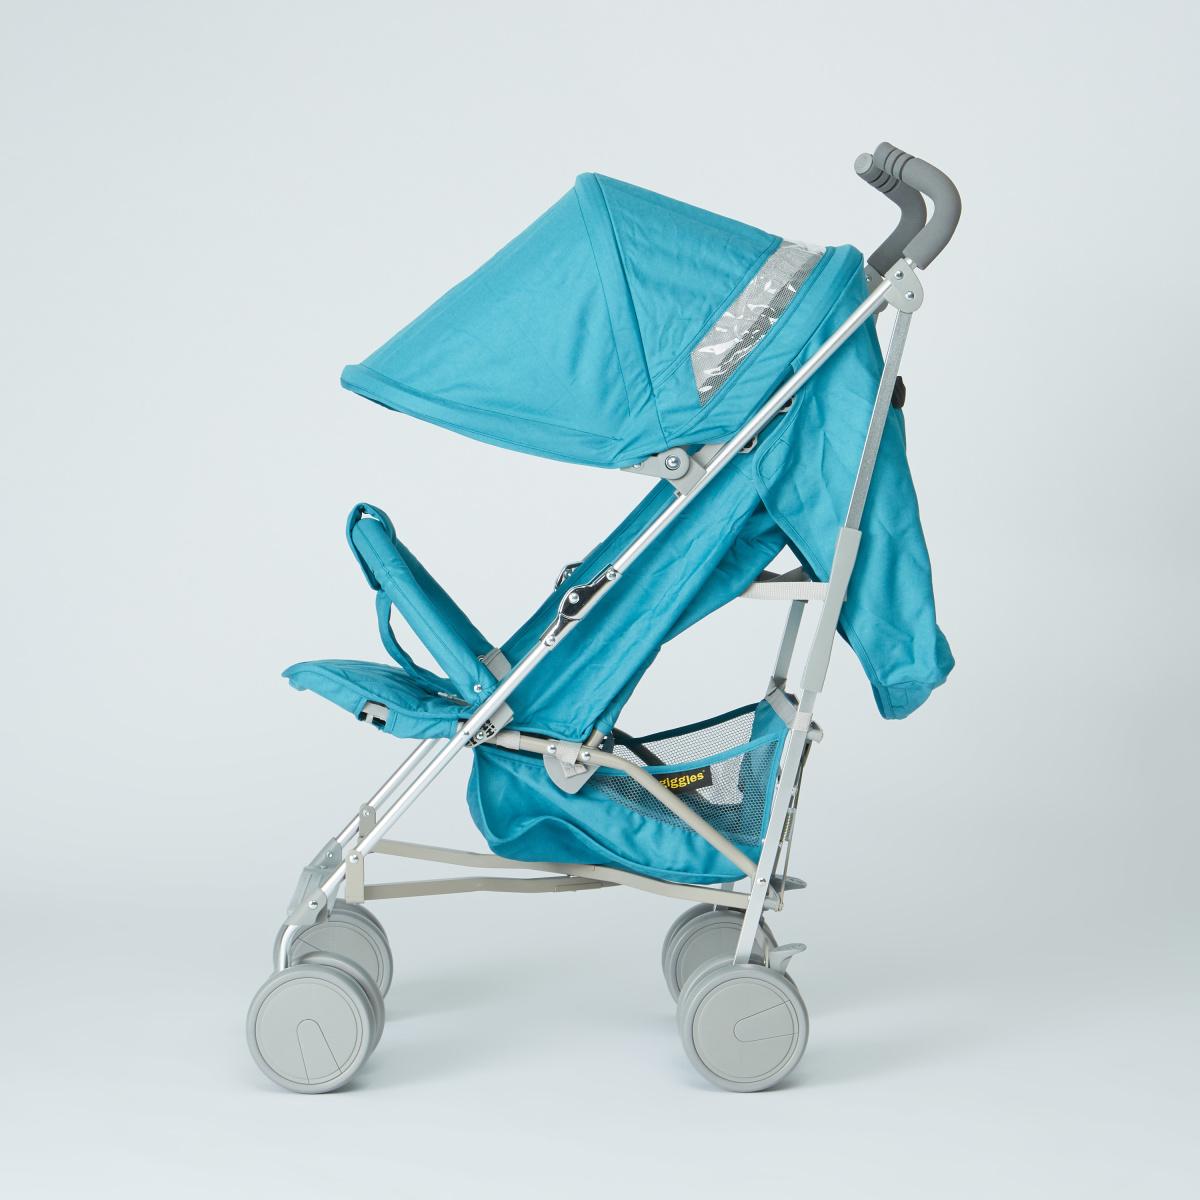 Giggles Tourling Stroller with Canopy